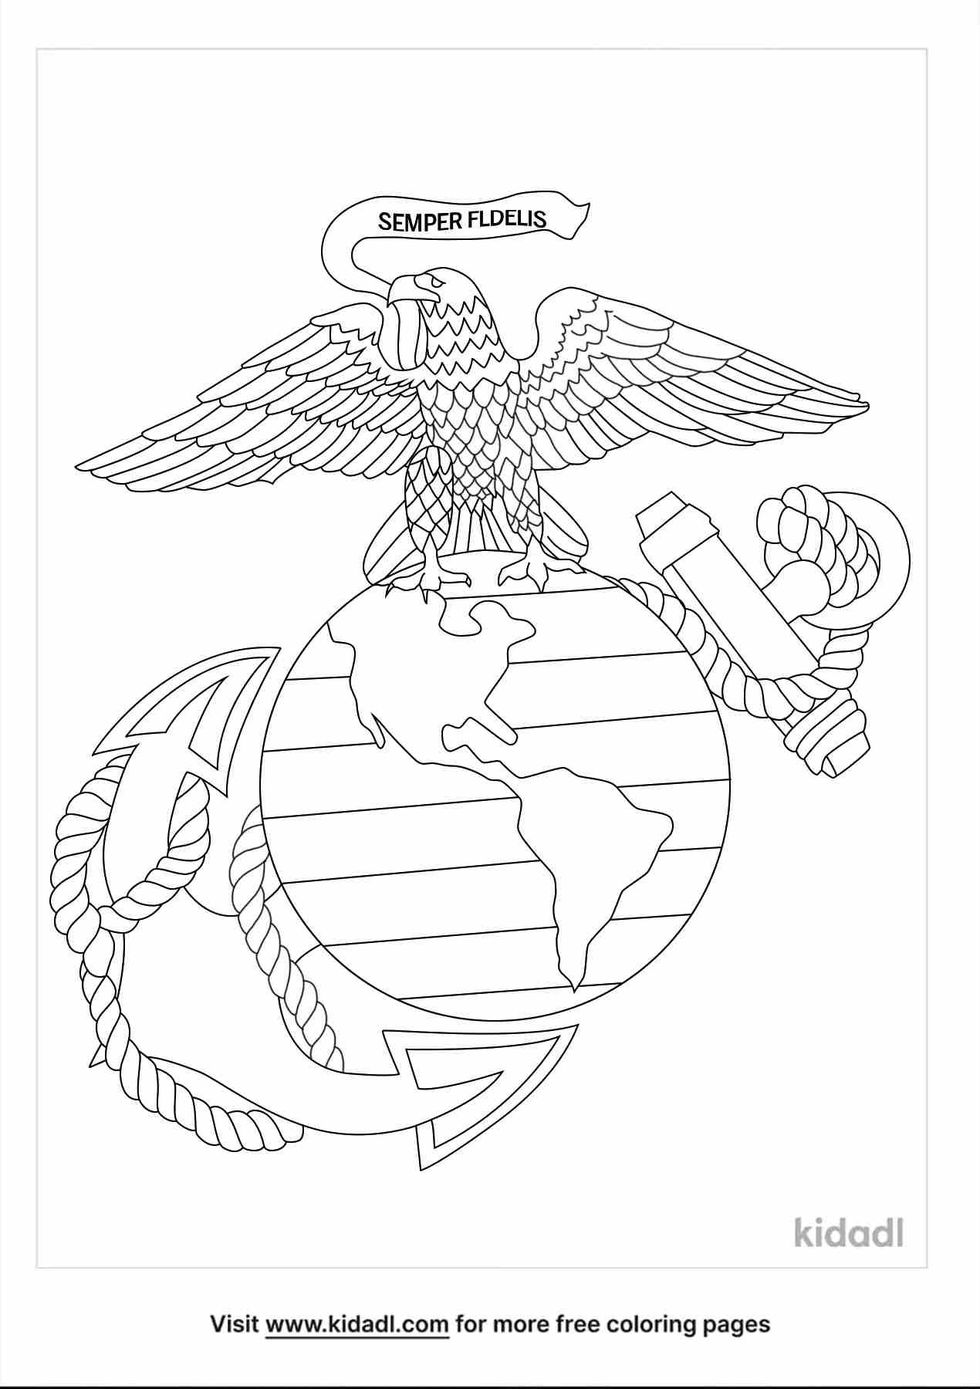 Marine Corps logo coloring pages for kids.